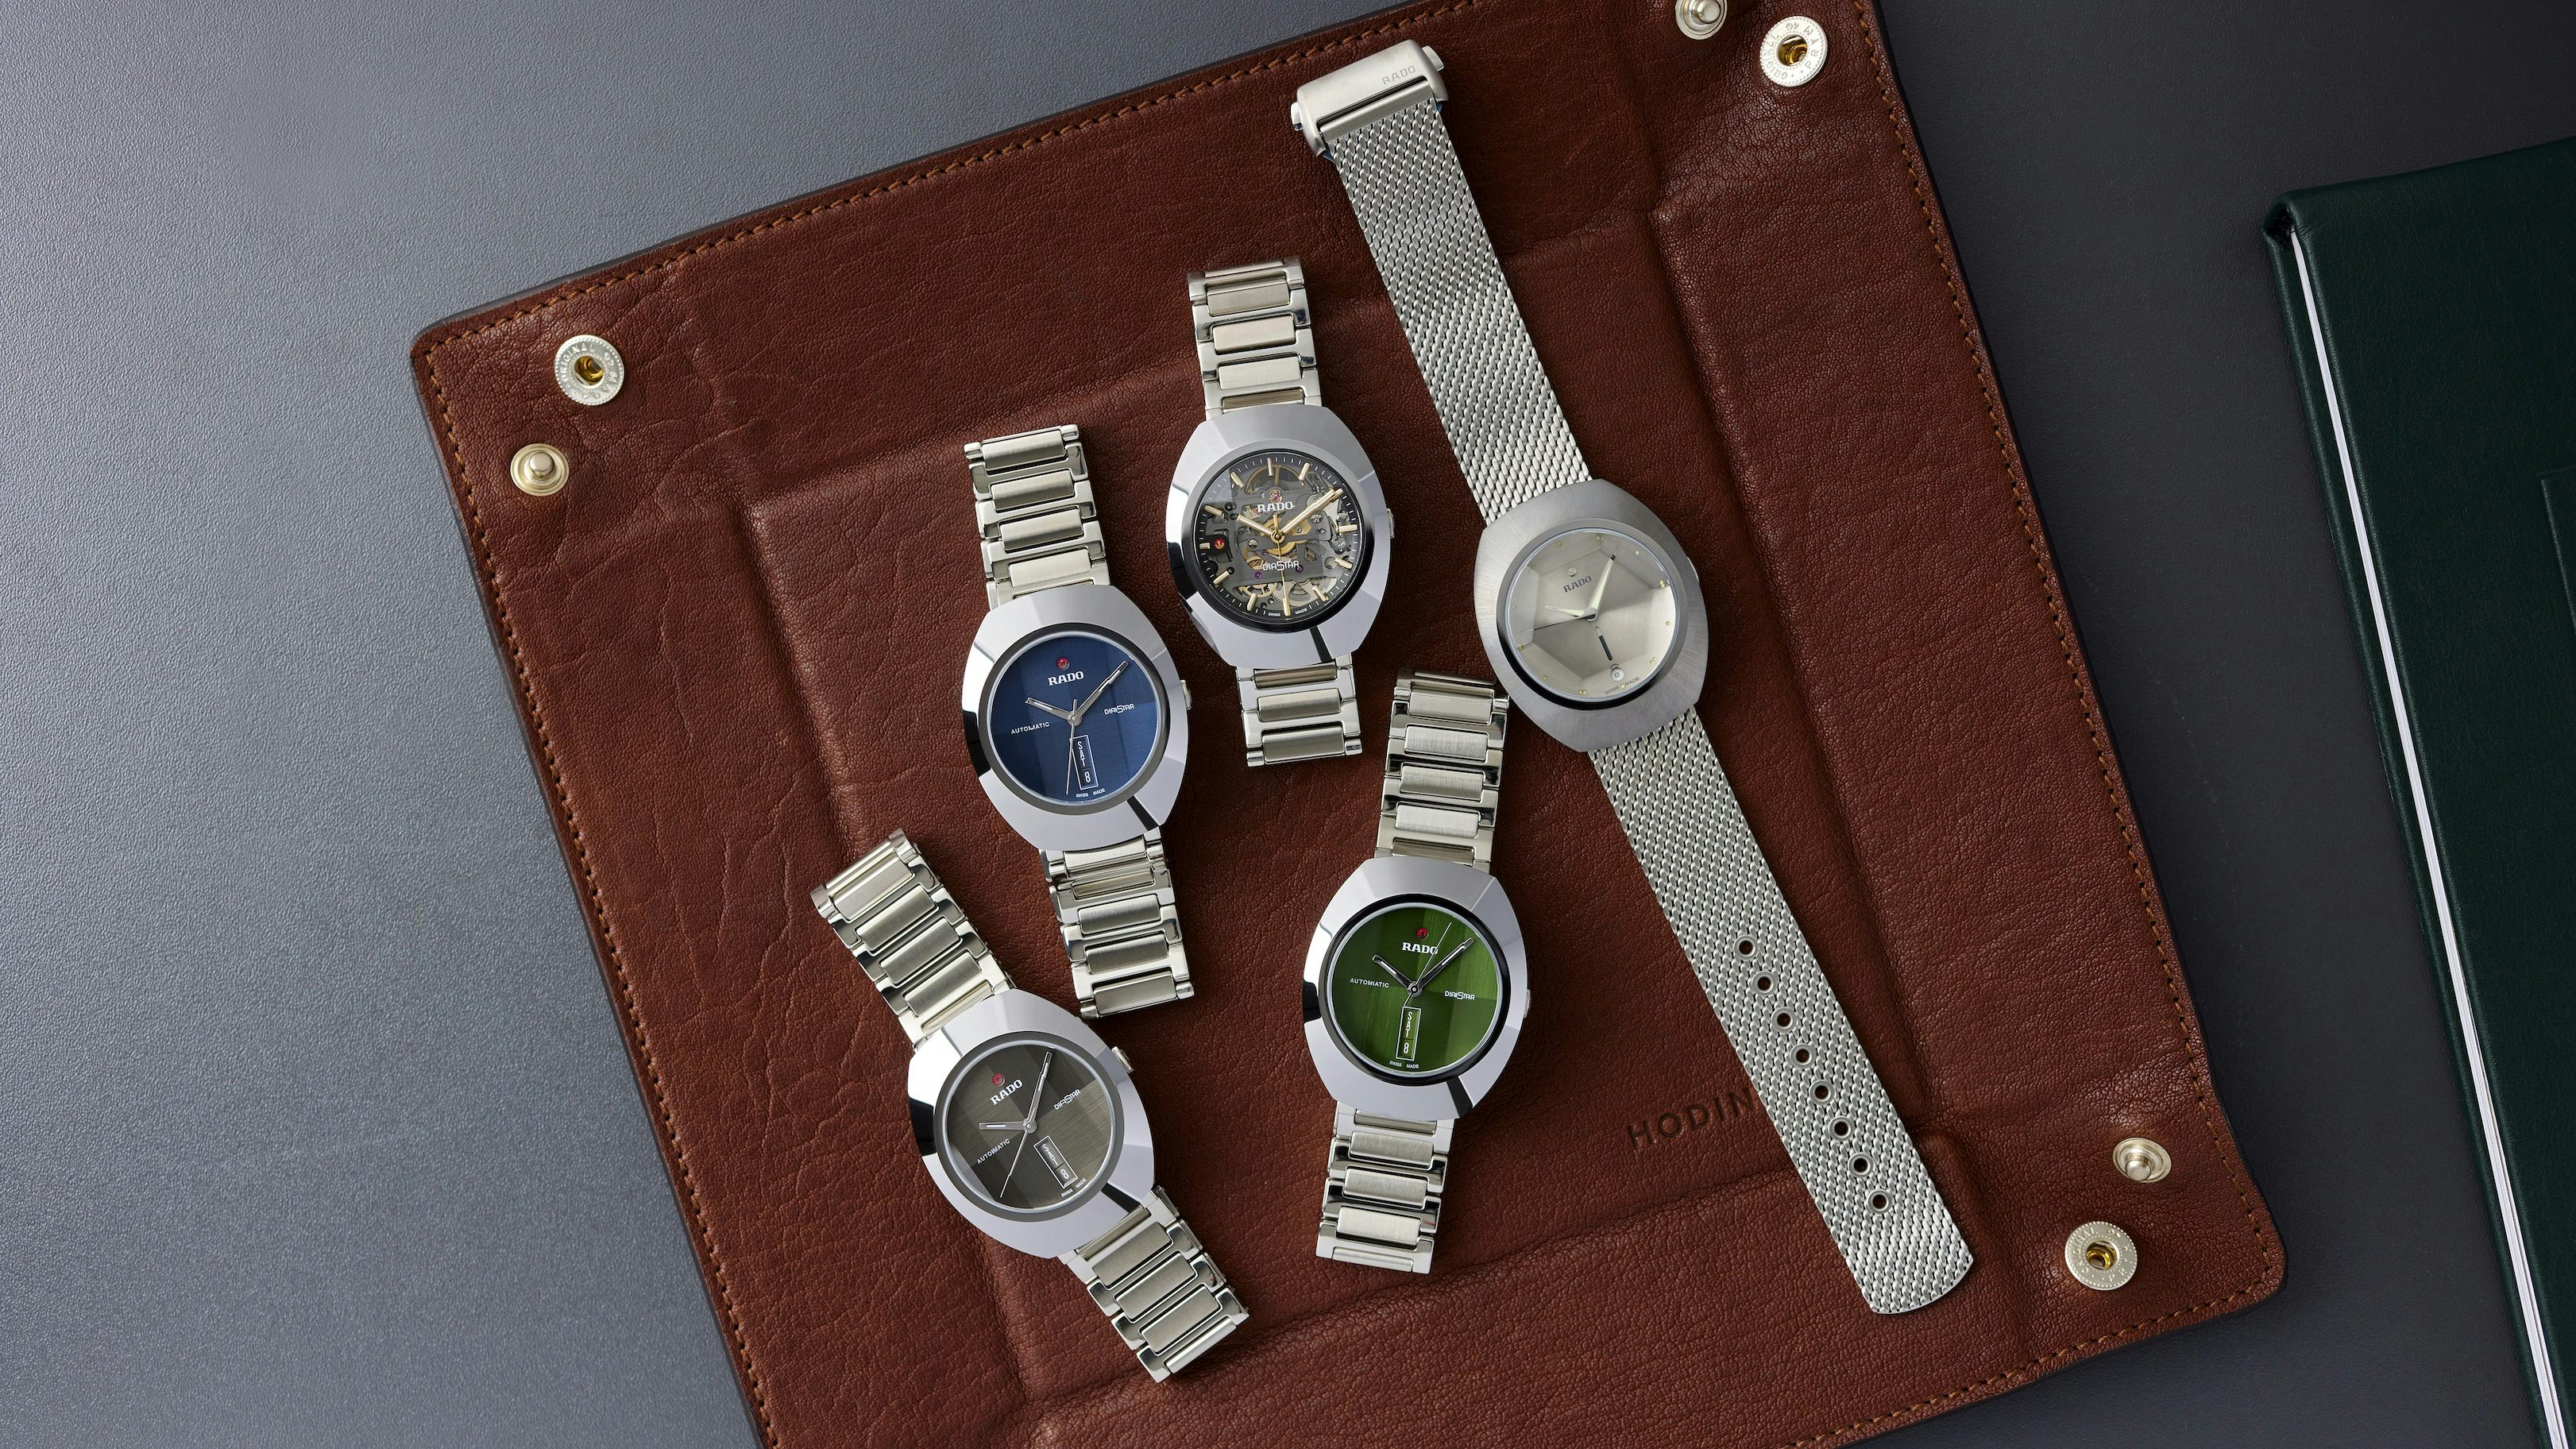 New Vintage Watches In The Hodinkee Shop